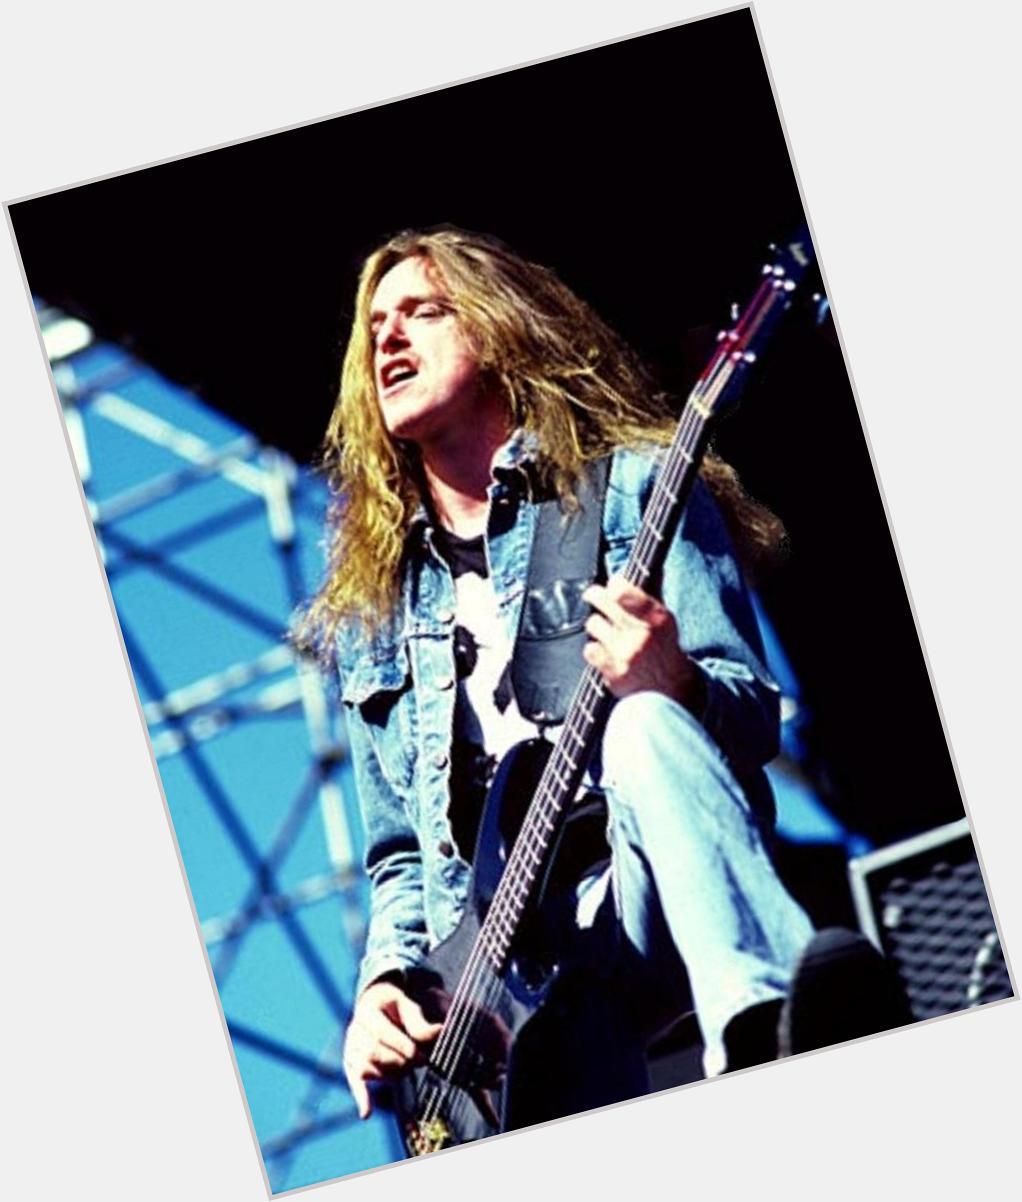 Happy birthday to my favourite bass player: Cliff Burton. Absolute Legend. RIP and horns up     